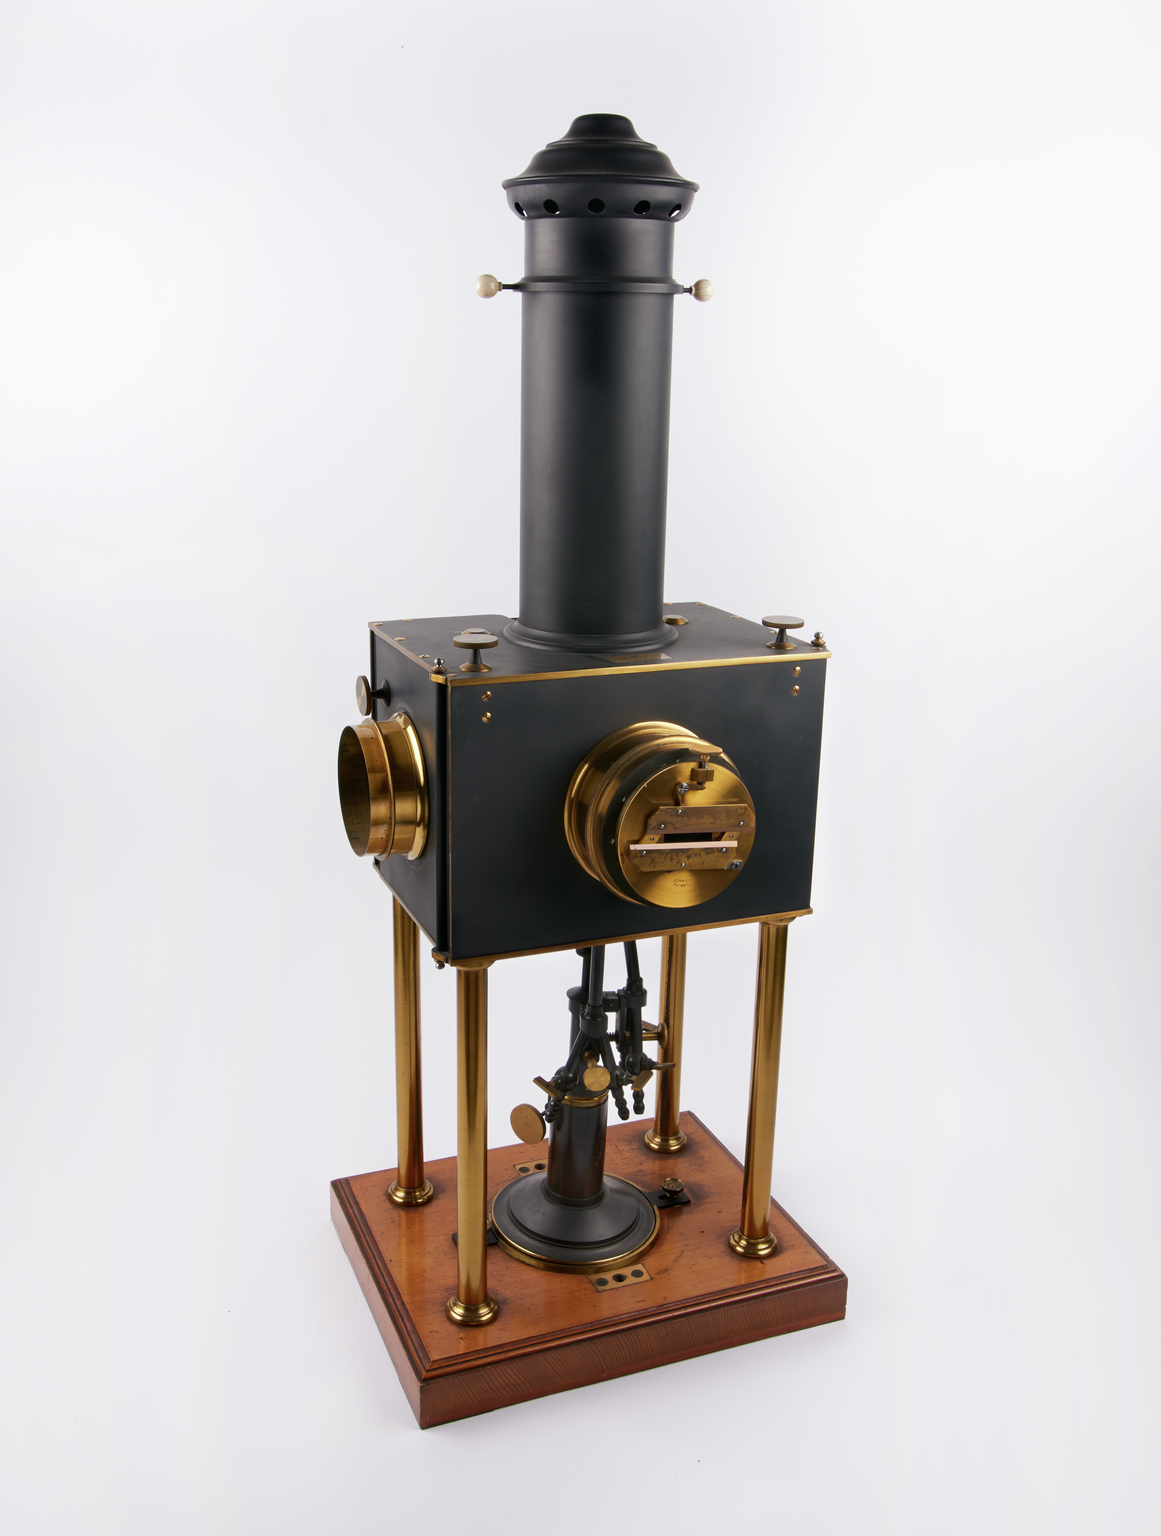 Oxyhydrogen microscope by Jules Duboscq, c. 1850, used to magnify microscopic images by limelight